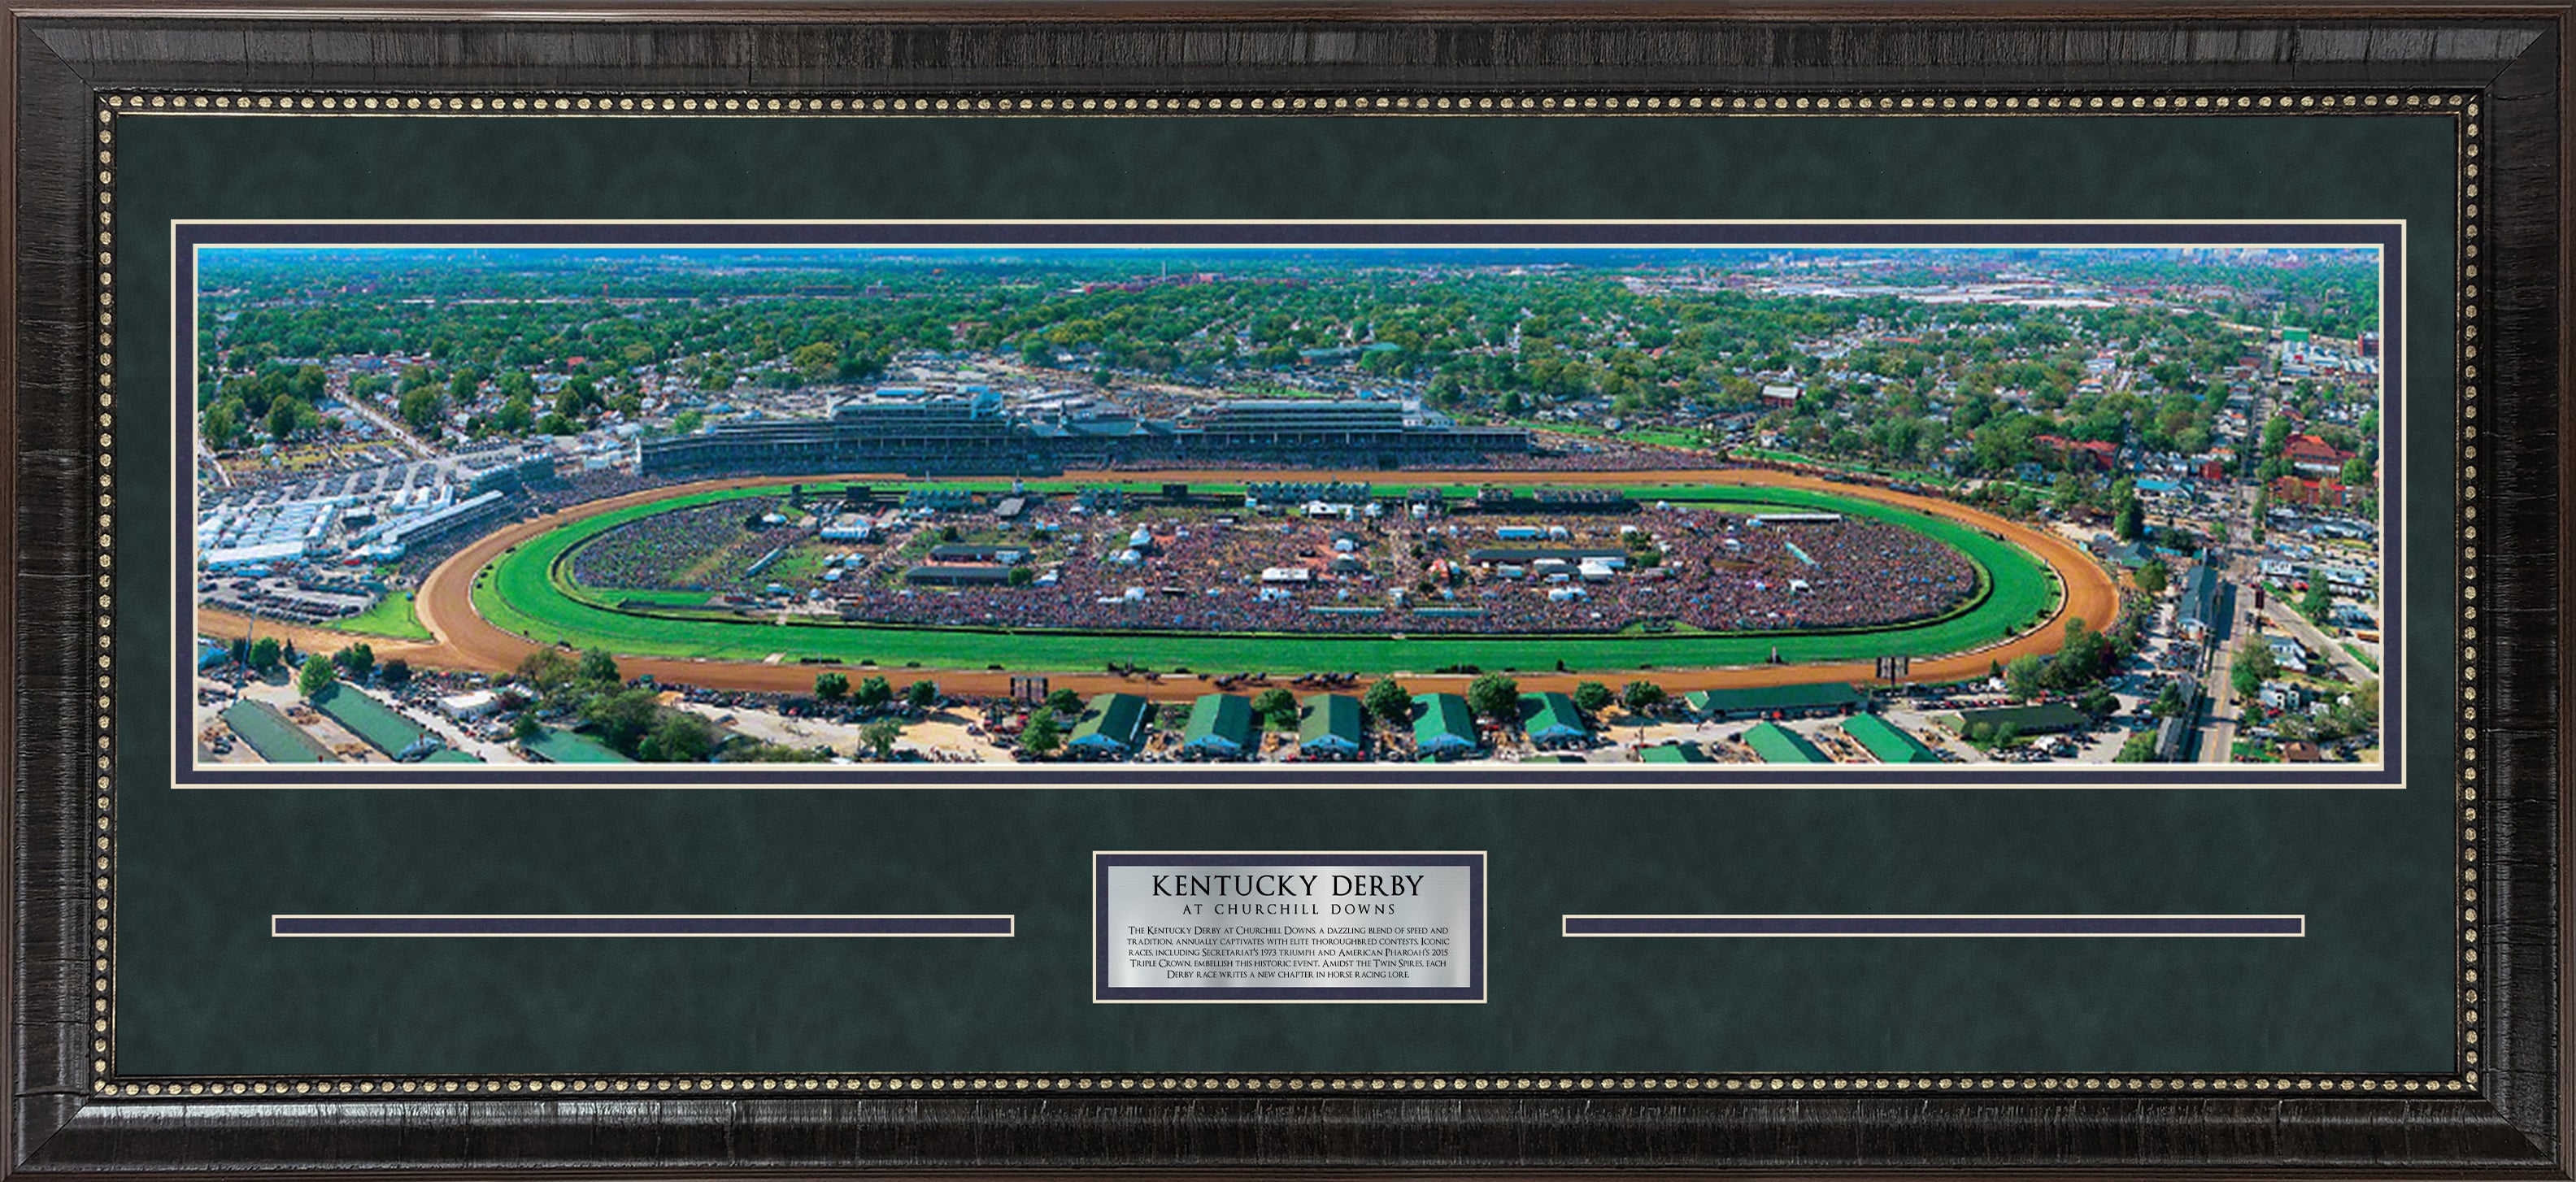 Kentucky Derby at Churchill Downs Panorama